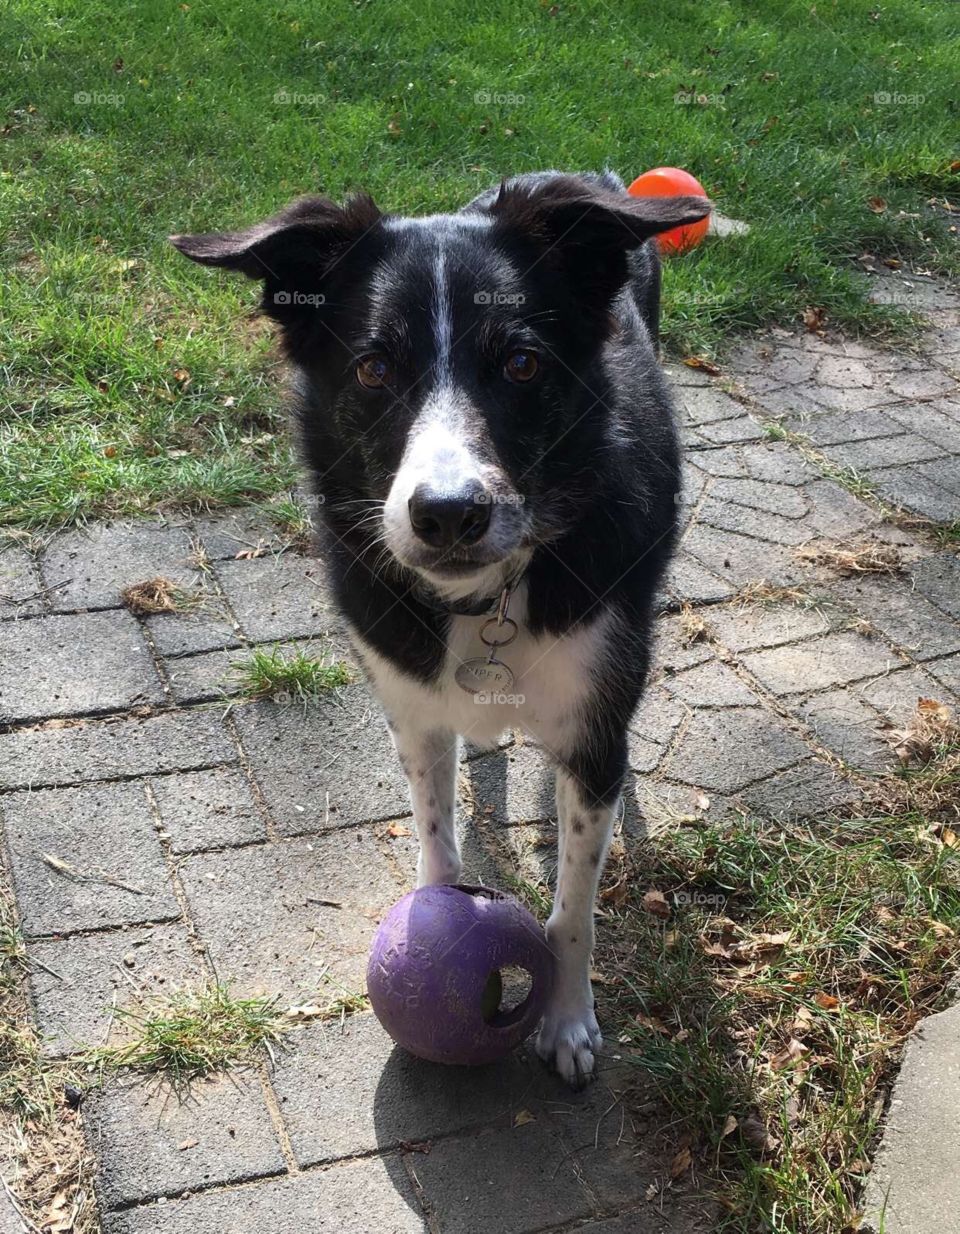 Piper the border collie playing with a ball. He’s very good at posing and modeling. 